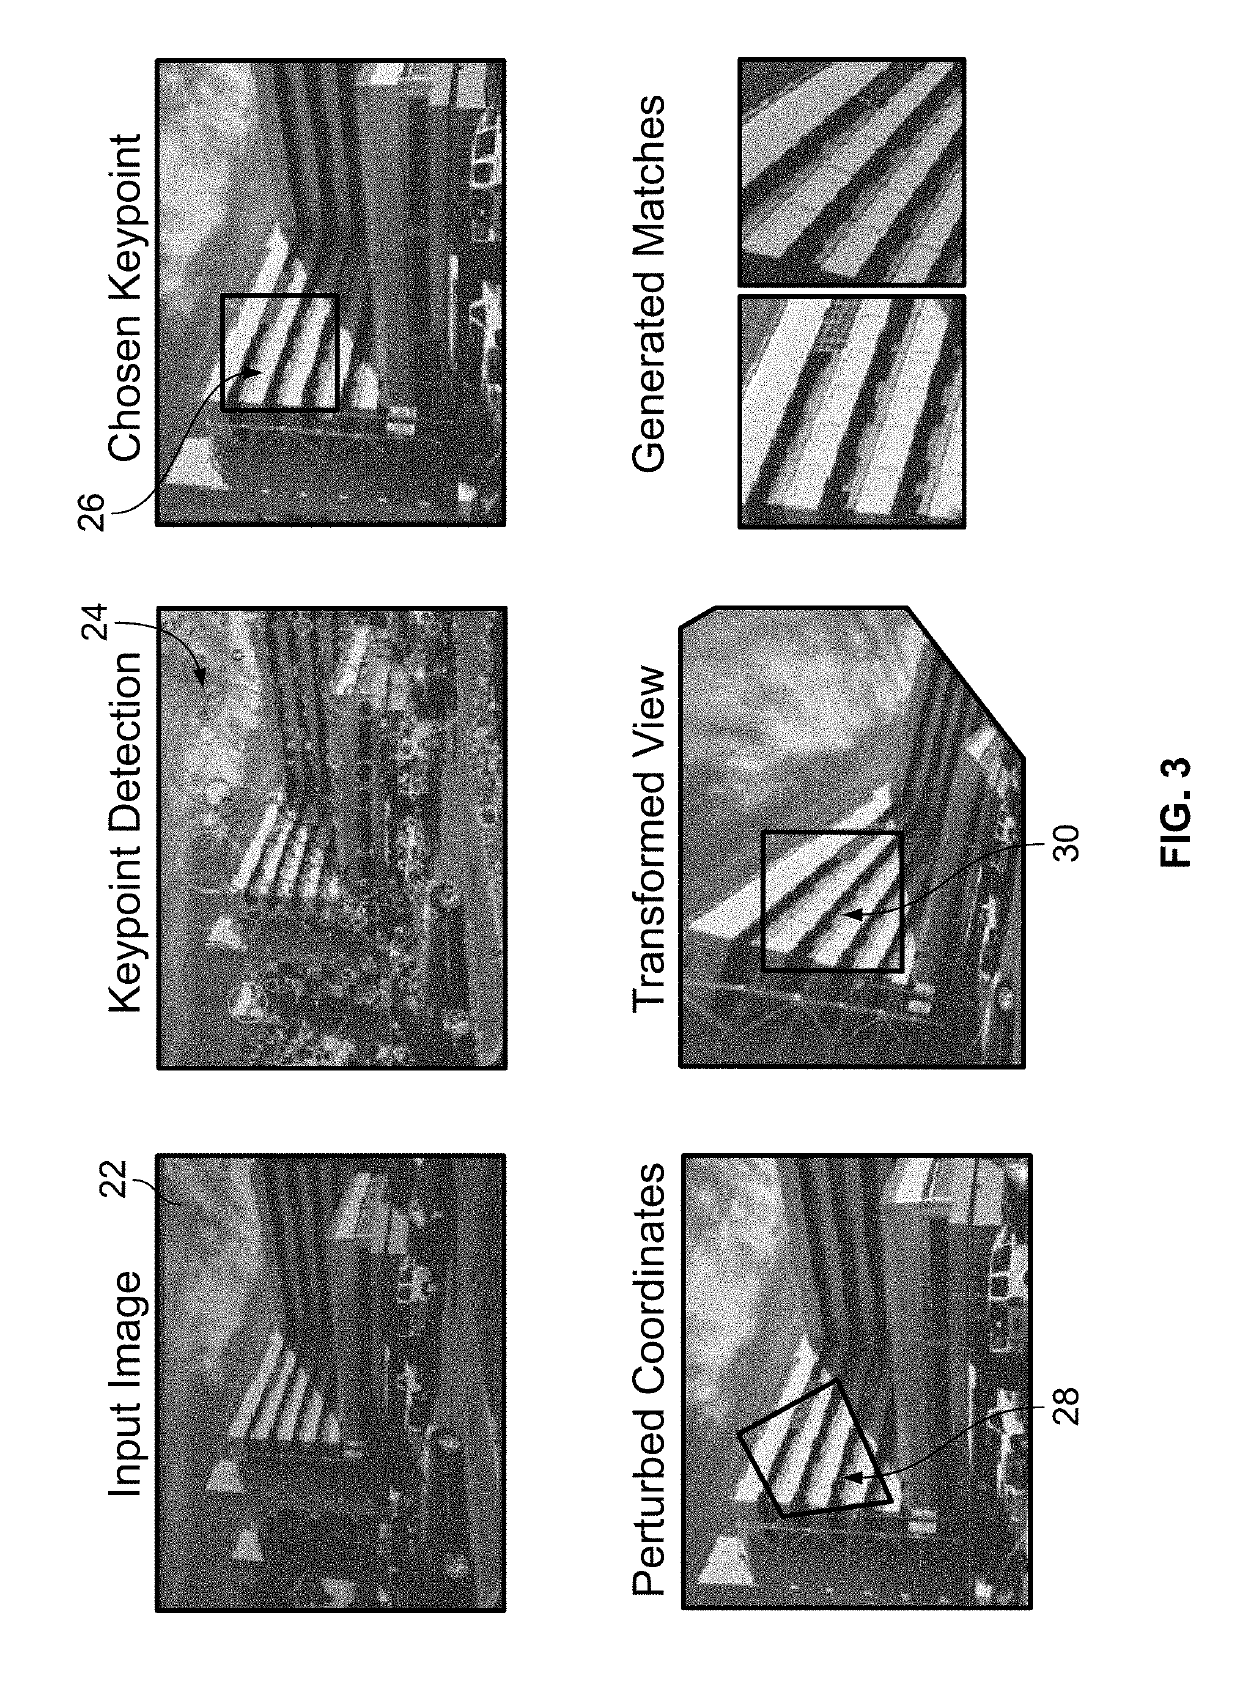 Computer Vision Systems and Methods for Machine Learning Using Image Hallucinations